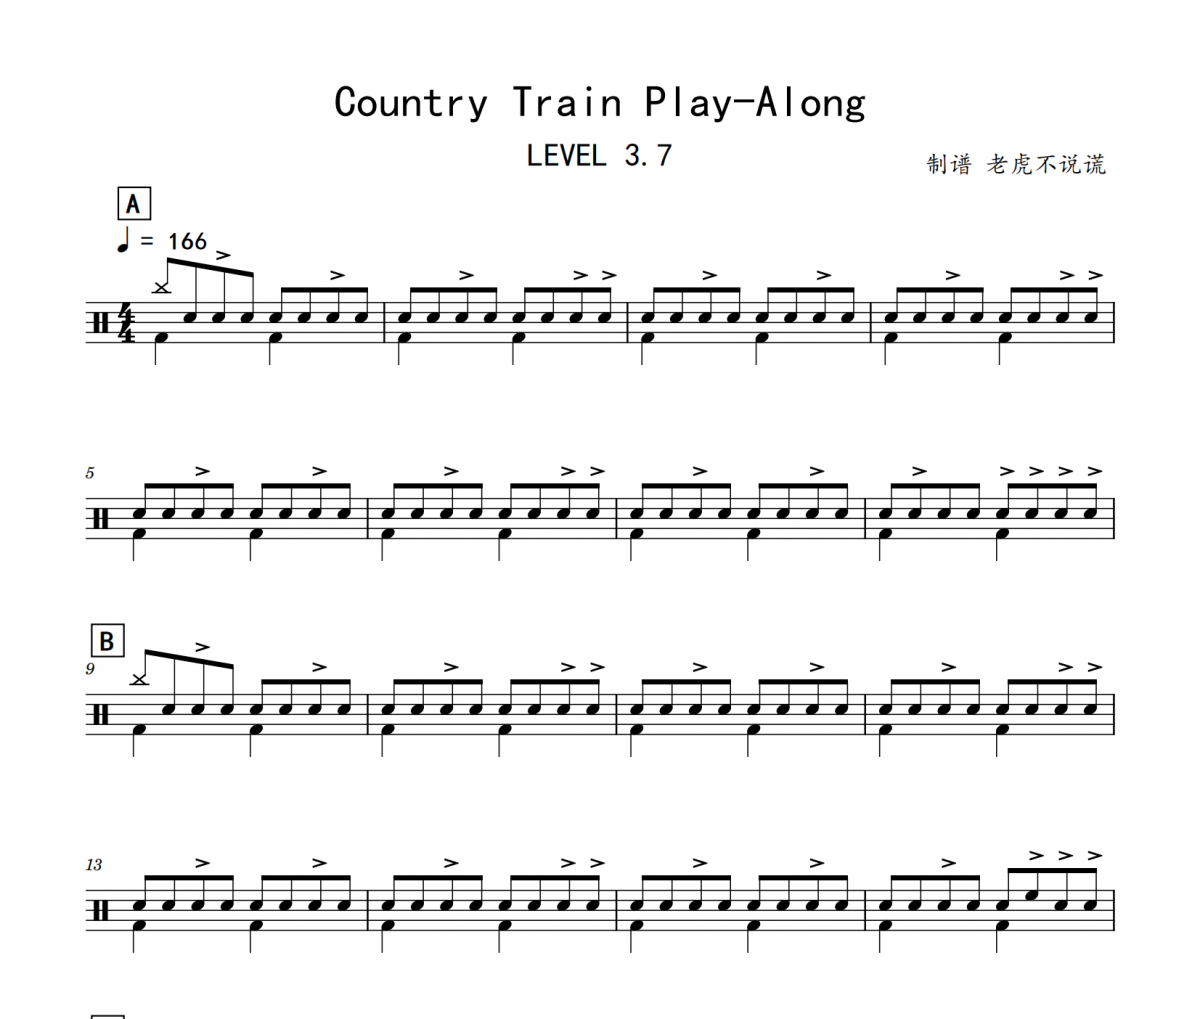 LEVEL 3.7-Country Train Play-Along（无鼓节拍器）架子鼓谱爵士鼓曲谱